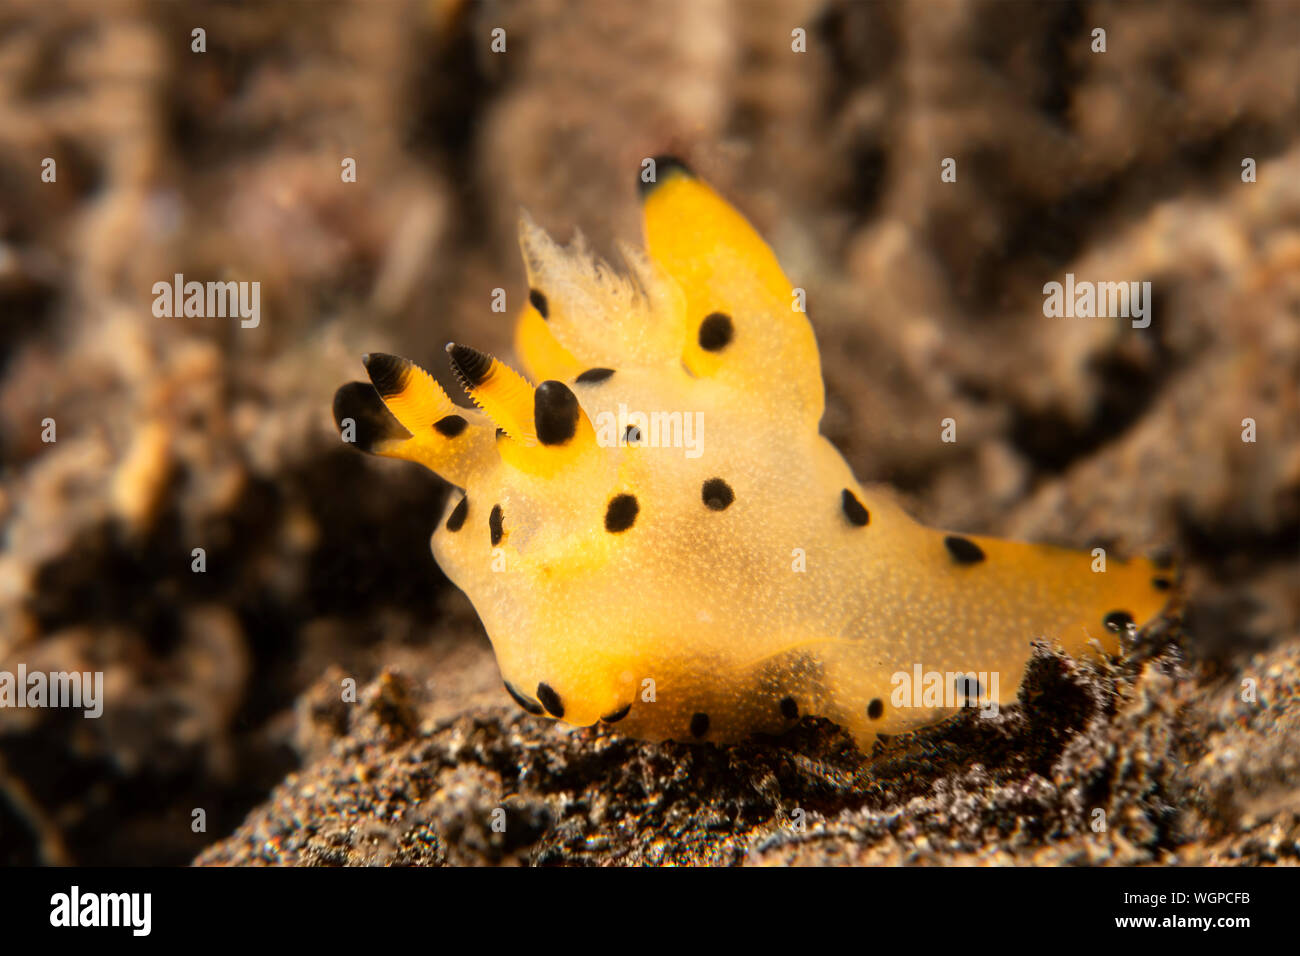 A strange looking orange and yellow pikachu nudibranch crawls across a reef in search of food. Stock Photo